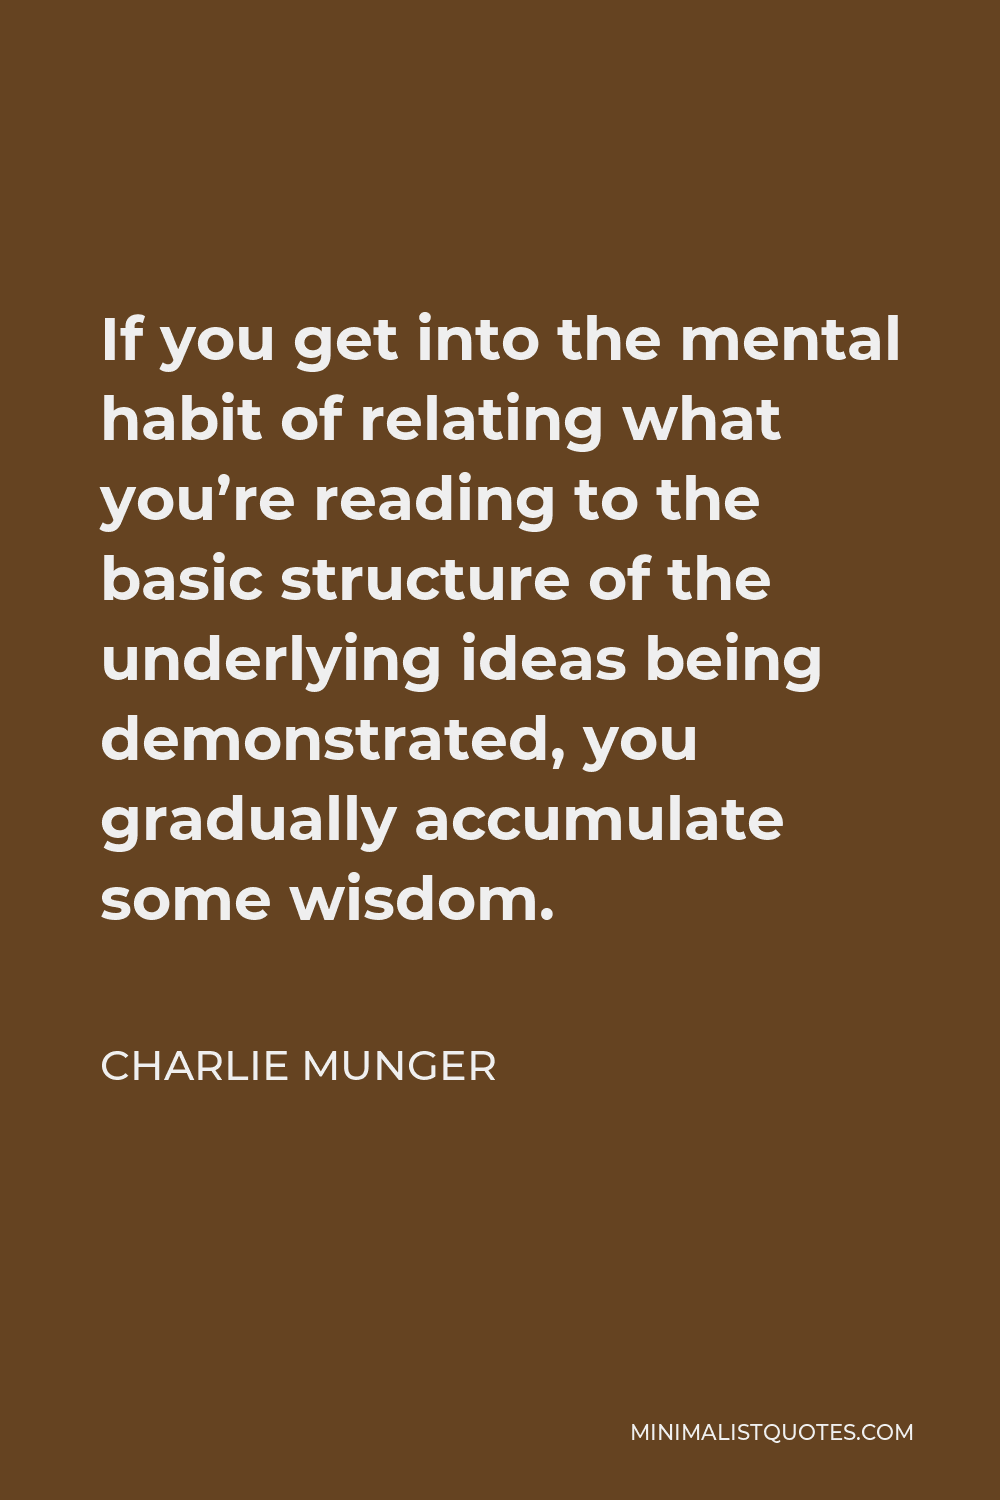 Charlie Munger Quote - If you get into the mental habit of relating what you’re reading to the basic structure of the underlying ideas being demonstrated, you gradually accumulate some wisdom.